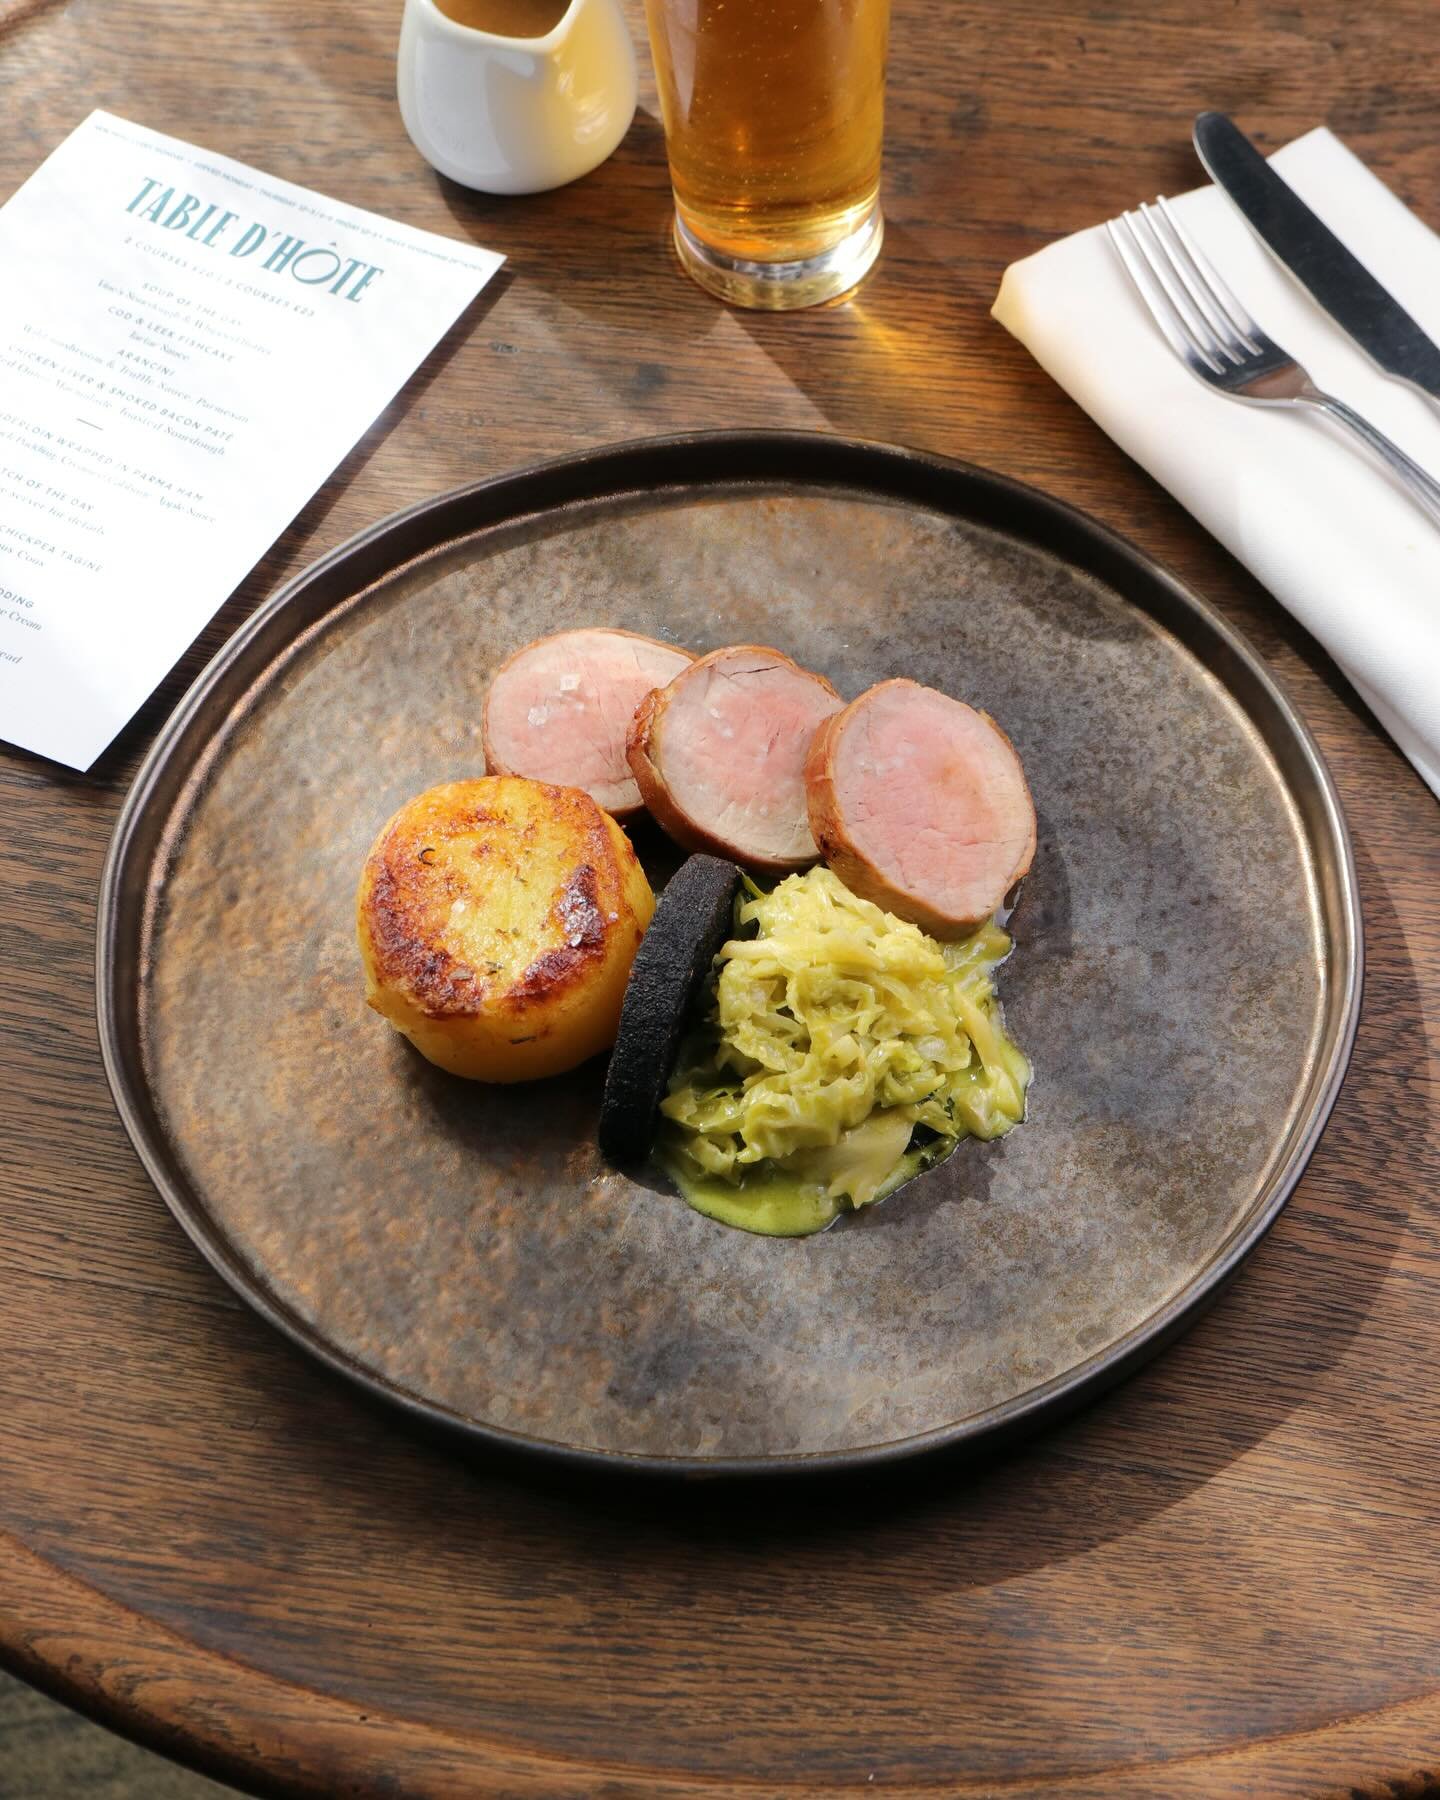 On this week&rsquo;s Table D&rsquo;h&ocirc;te&hellip;✨

2 courses for &pound;20 | 3 Courses for &pound;23

Roast Pork Tenderloin wrapped in Parma Ham, Fondant Potato, Black Pudding, Creamed Cabbage &amp; Apple Sauce. Just one of the choices on this w